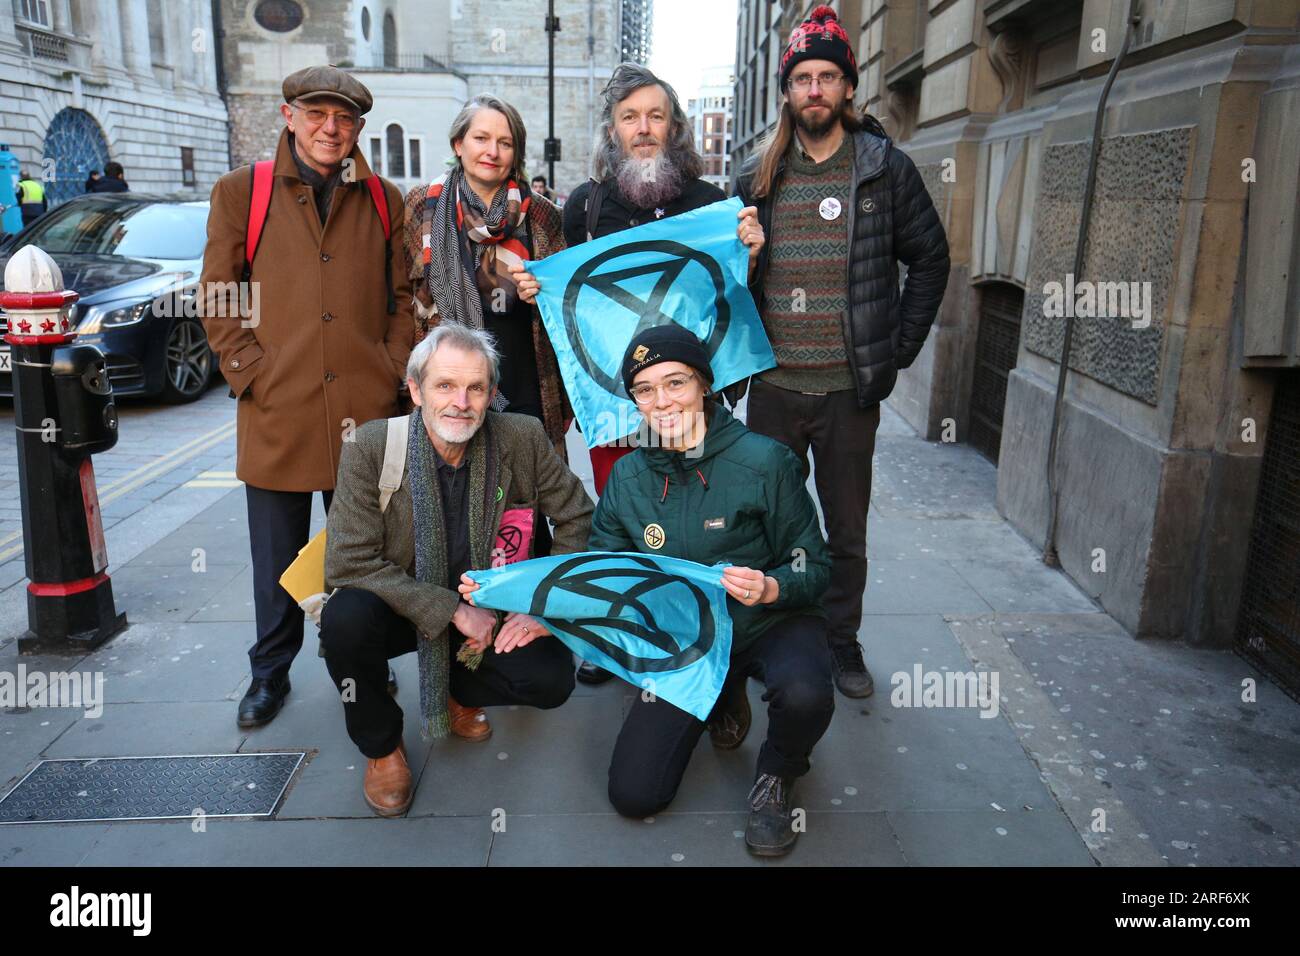 From left to right: Sir David King (back left), Claudia Fisher, 57, a business woman from Brighton, Senan Clifford, 59, a former teacher from Gloucestershire, and Ben Bont ( back right), 42, a tree surgeon from West Wales and David Lambert (front left), 60, a historian from Gloucestershire, Phoebe Valentine (front right), 23, a maths student from Brighton, pose outside the City of London Magistrates' Court, after they were arrested on 10 October 2019, during a peaceful demonstration - in which they glued themselves to the concourse between the DLR station and City Airport in east London. Stock Photo